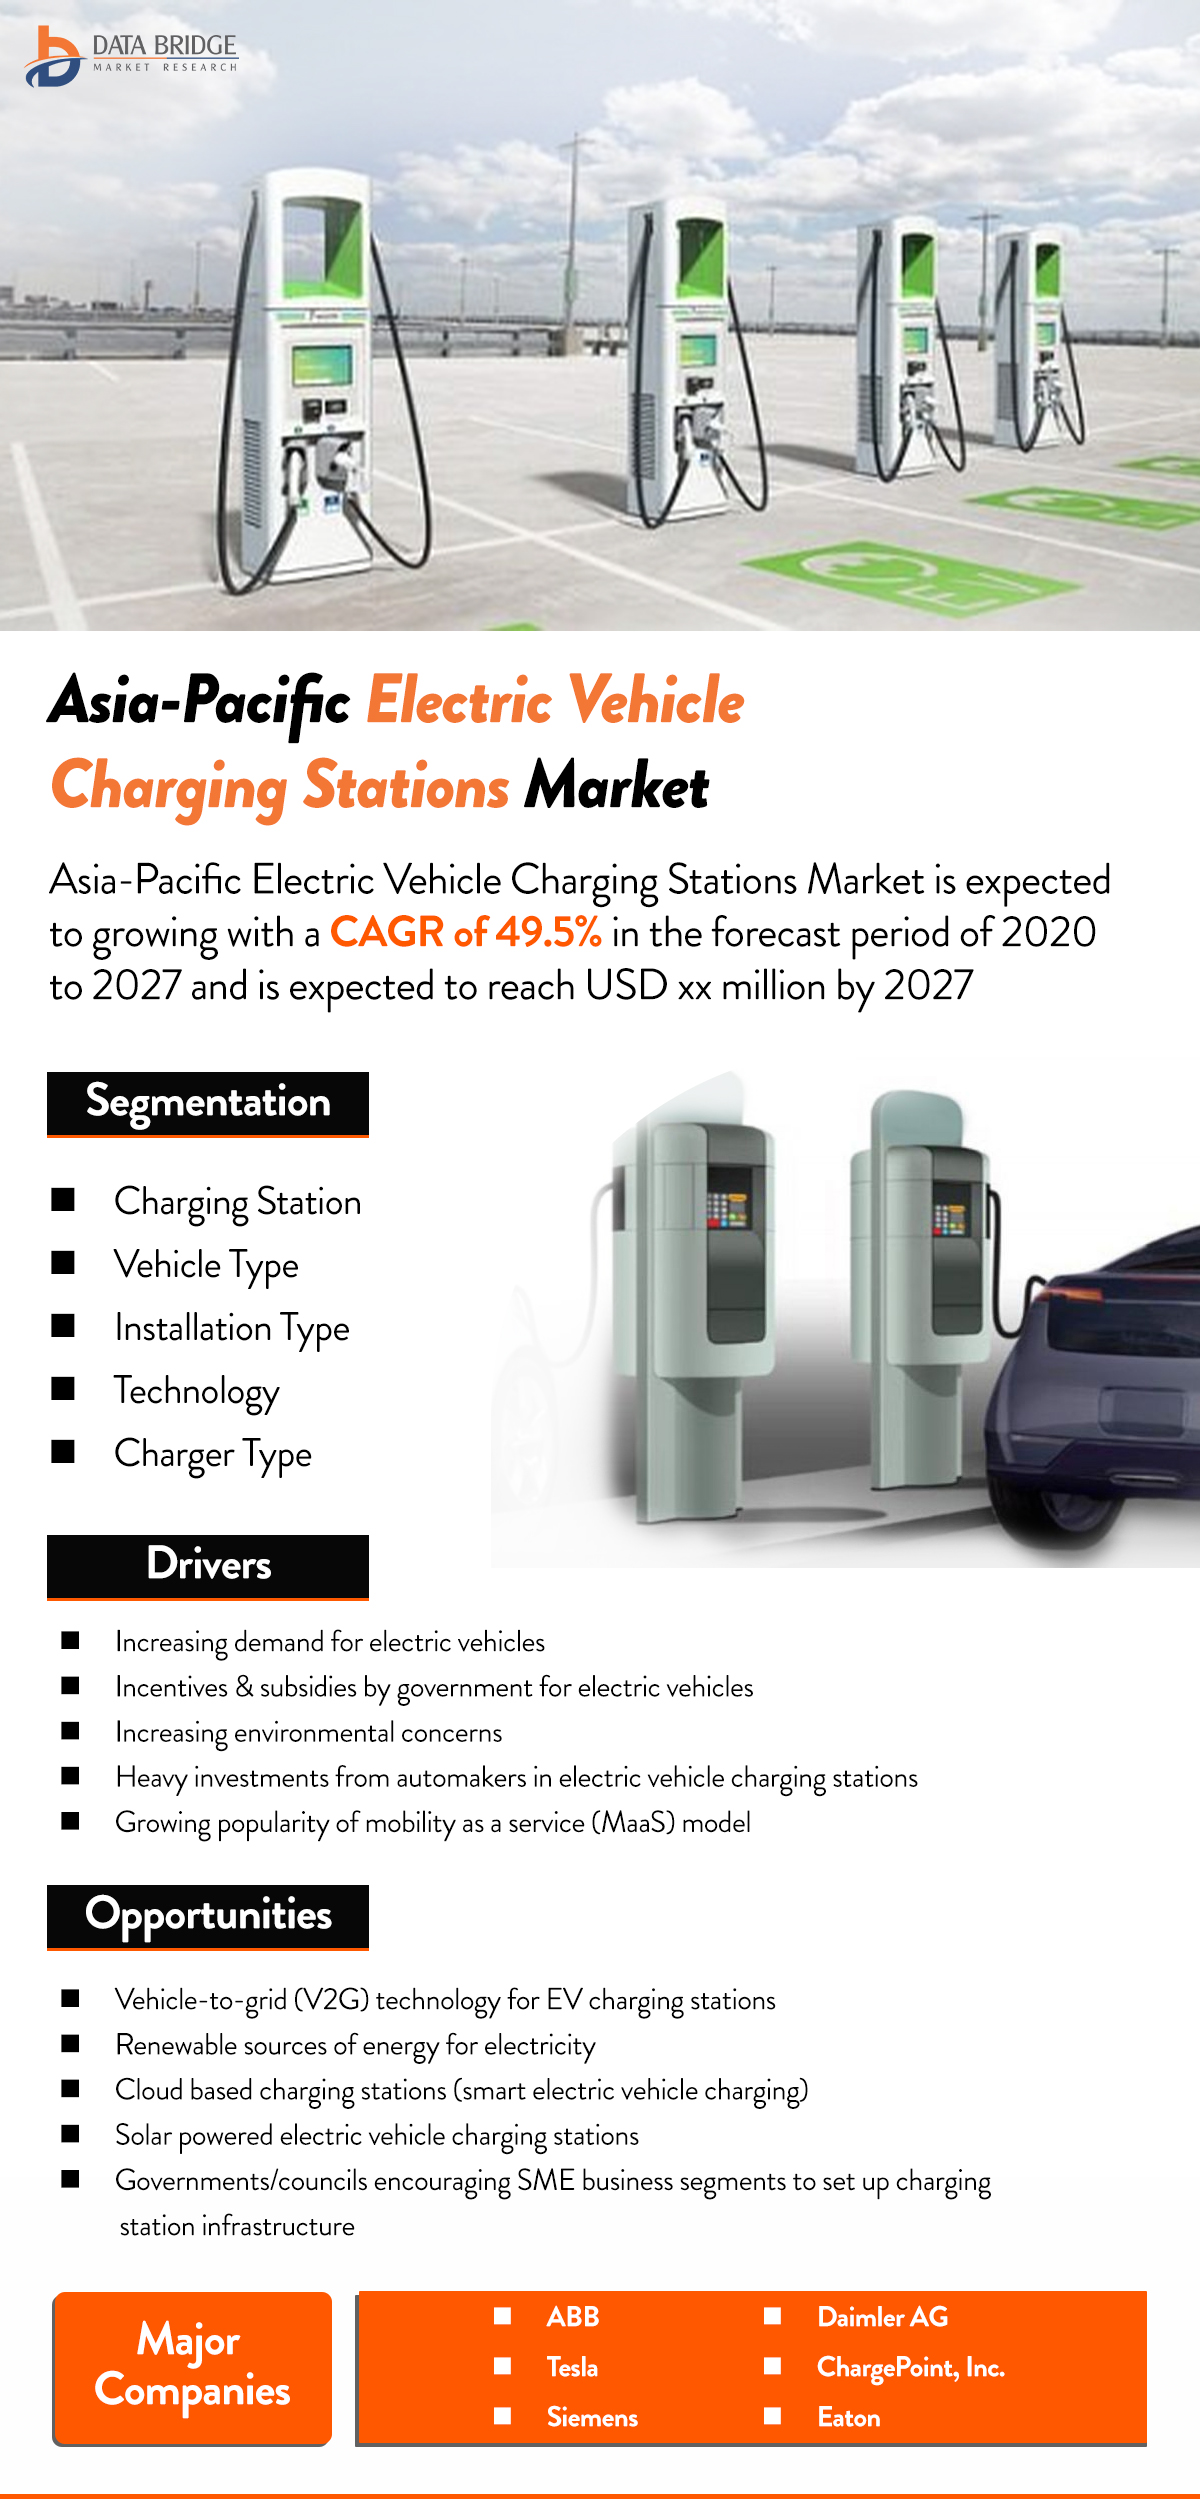 Asia-Pacific Electric Vehicle Charging Stations Market